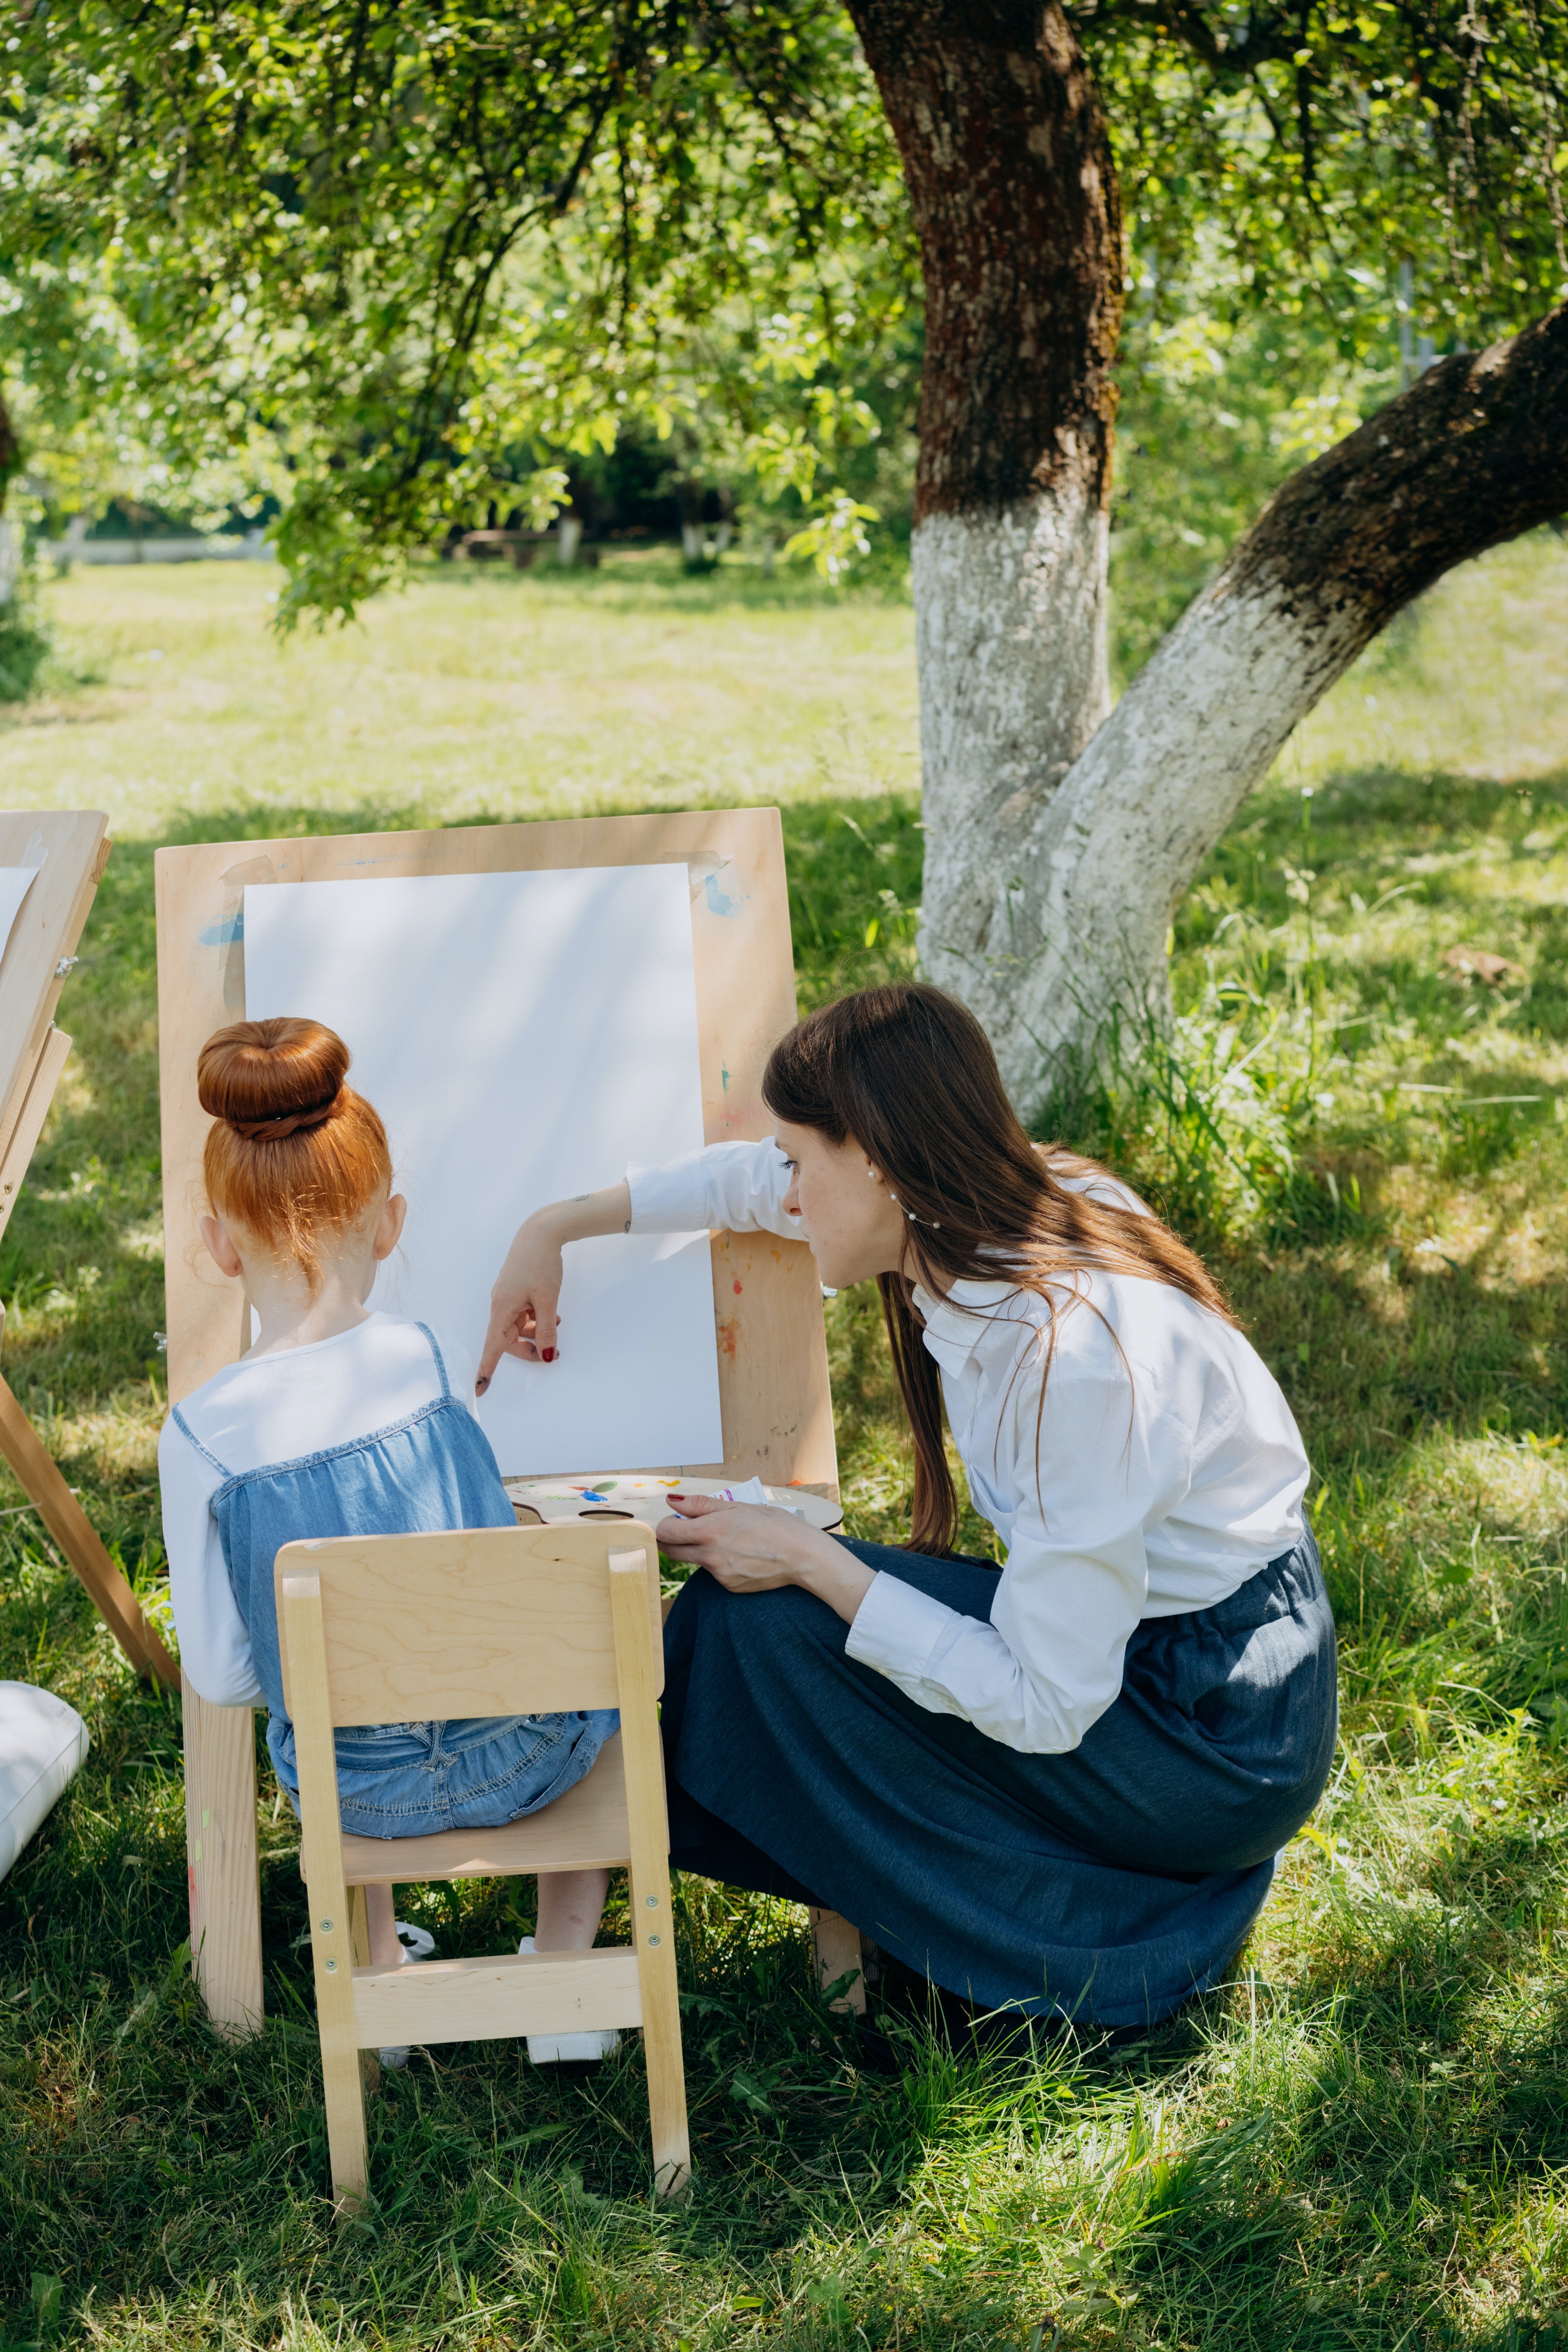 Thelma loved painting from a young age | Photo: Pexels